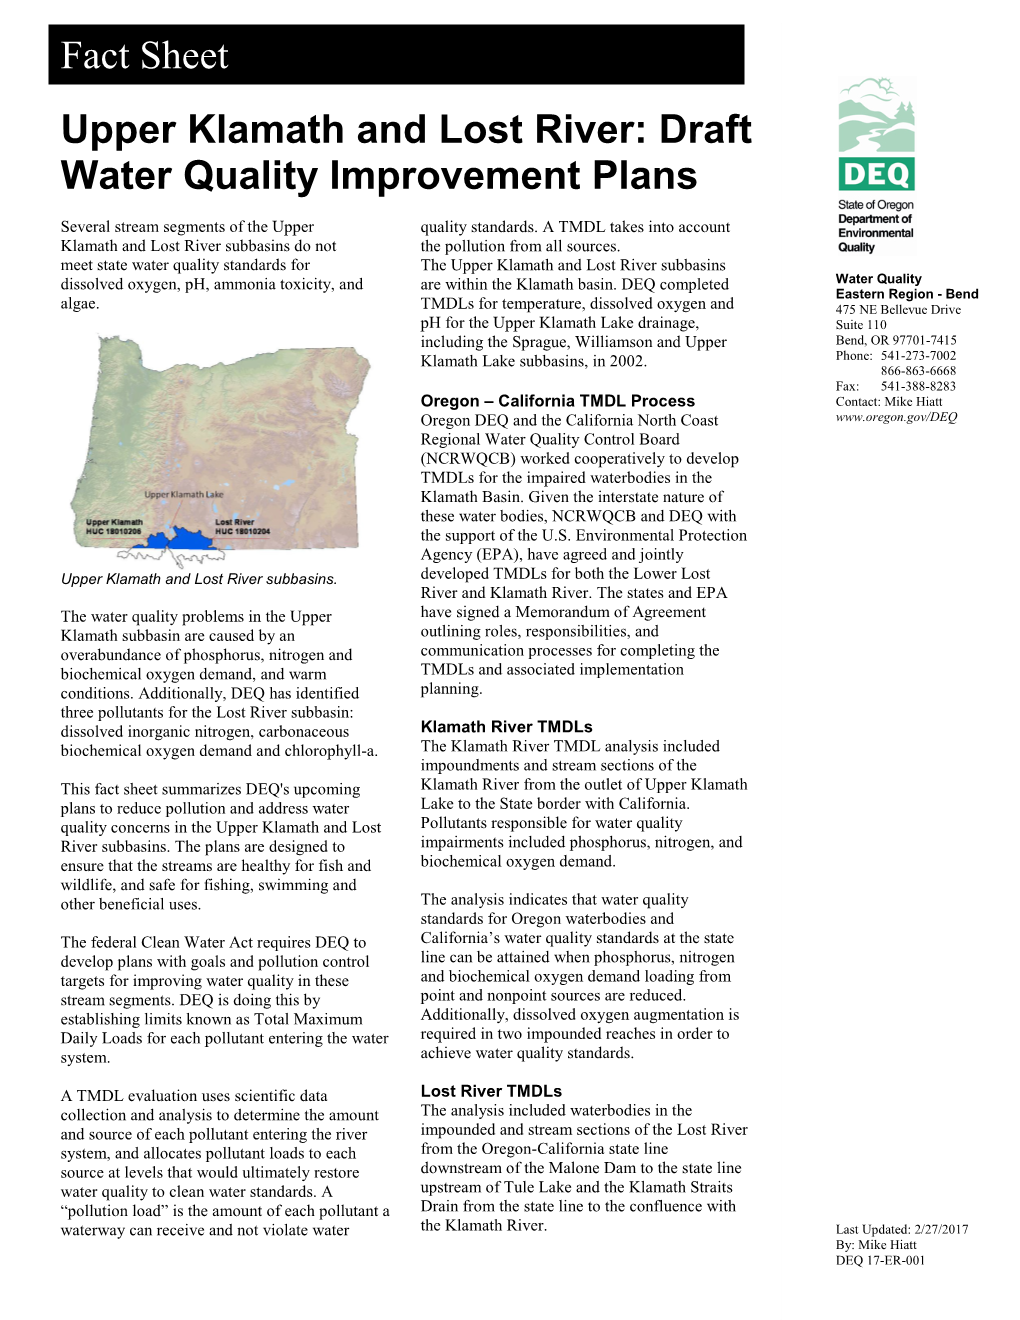 Water Quality Standards for the Upper Klamath and Lost River Subbasins Dissolved Oxygen, Ph, Ammonia Toxicity, and Are Within the Klamath Basin